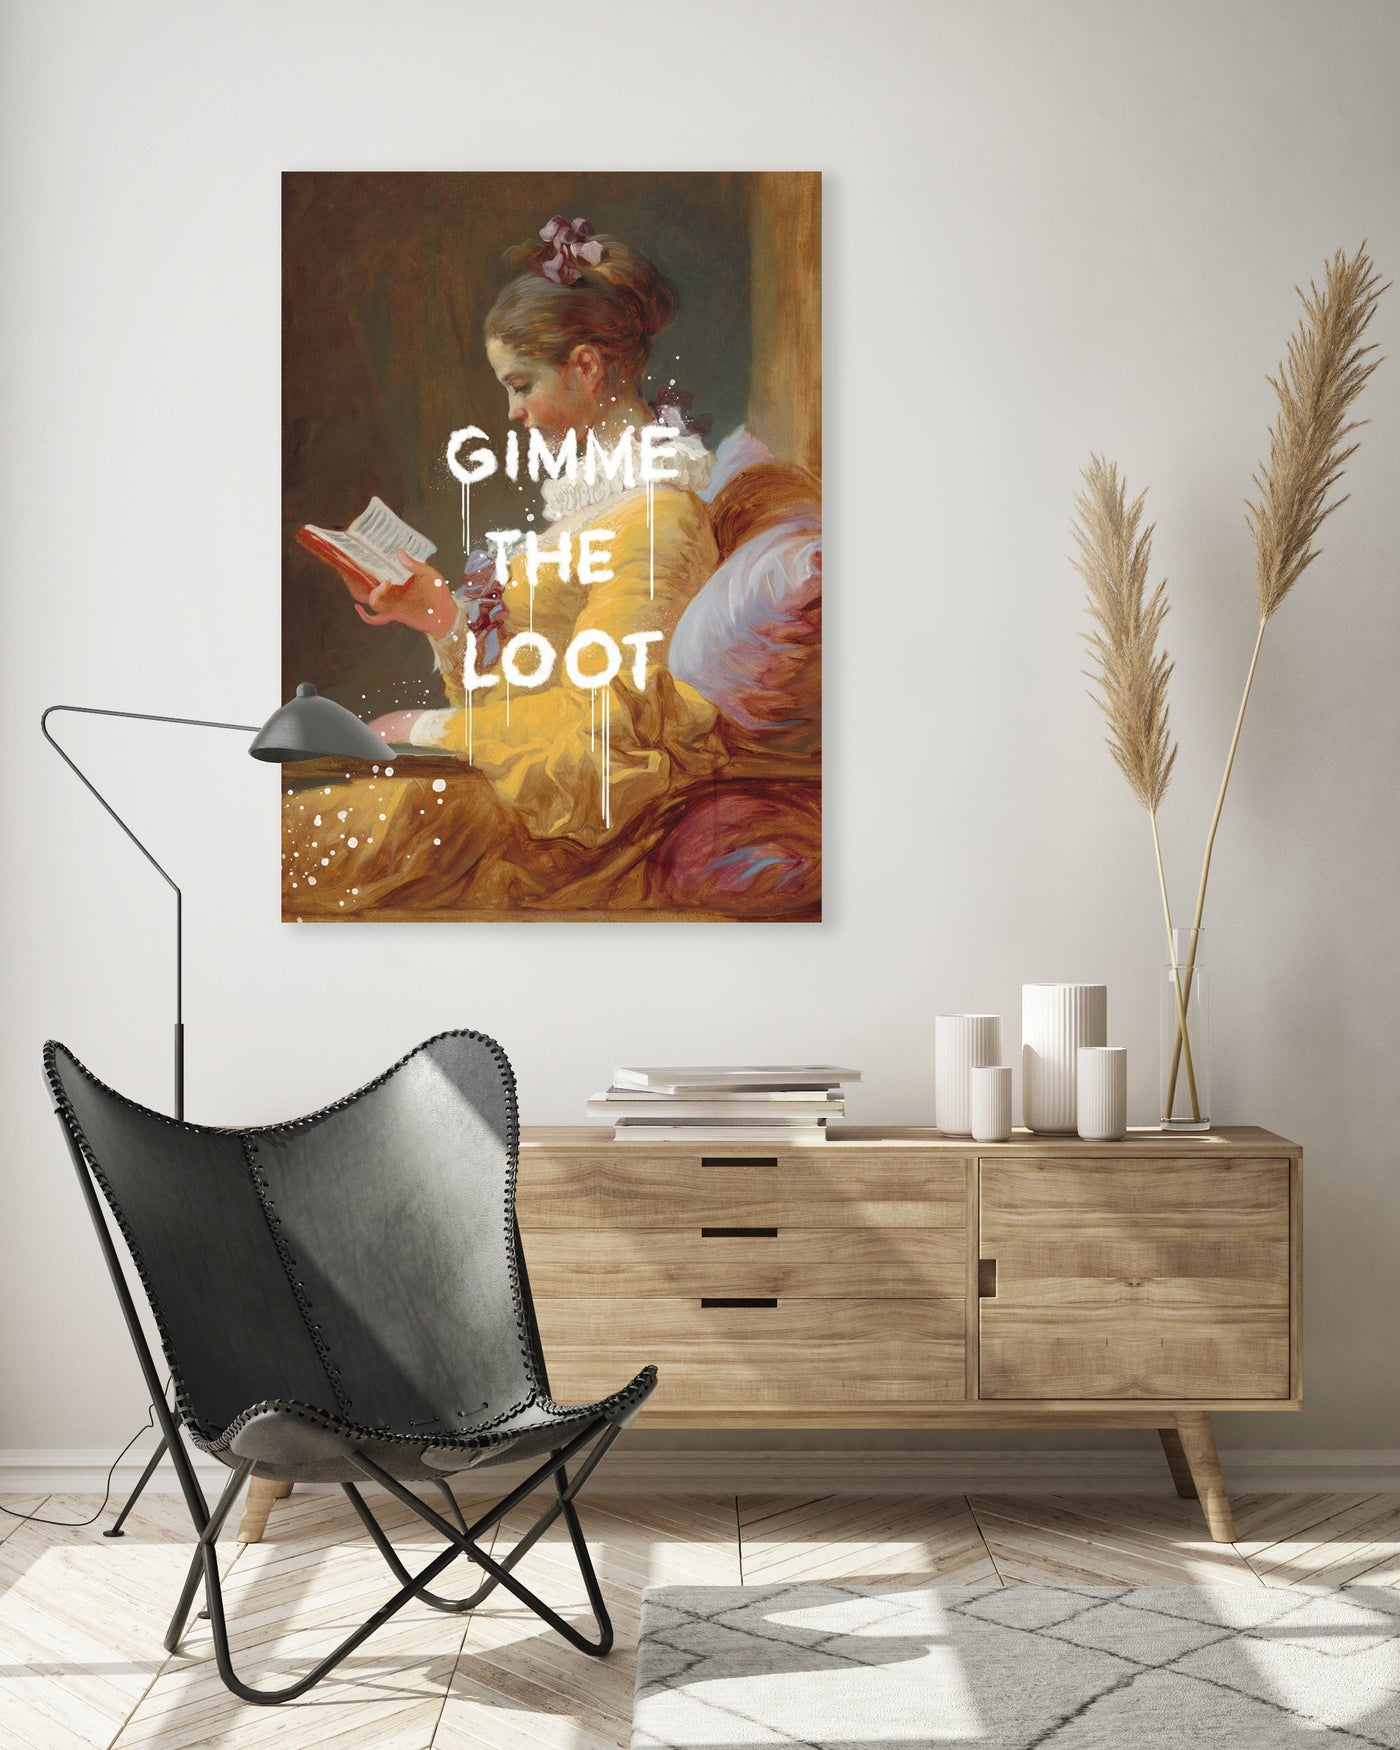 Gimme the loot - FLX Artworks